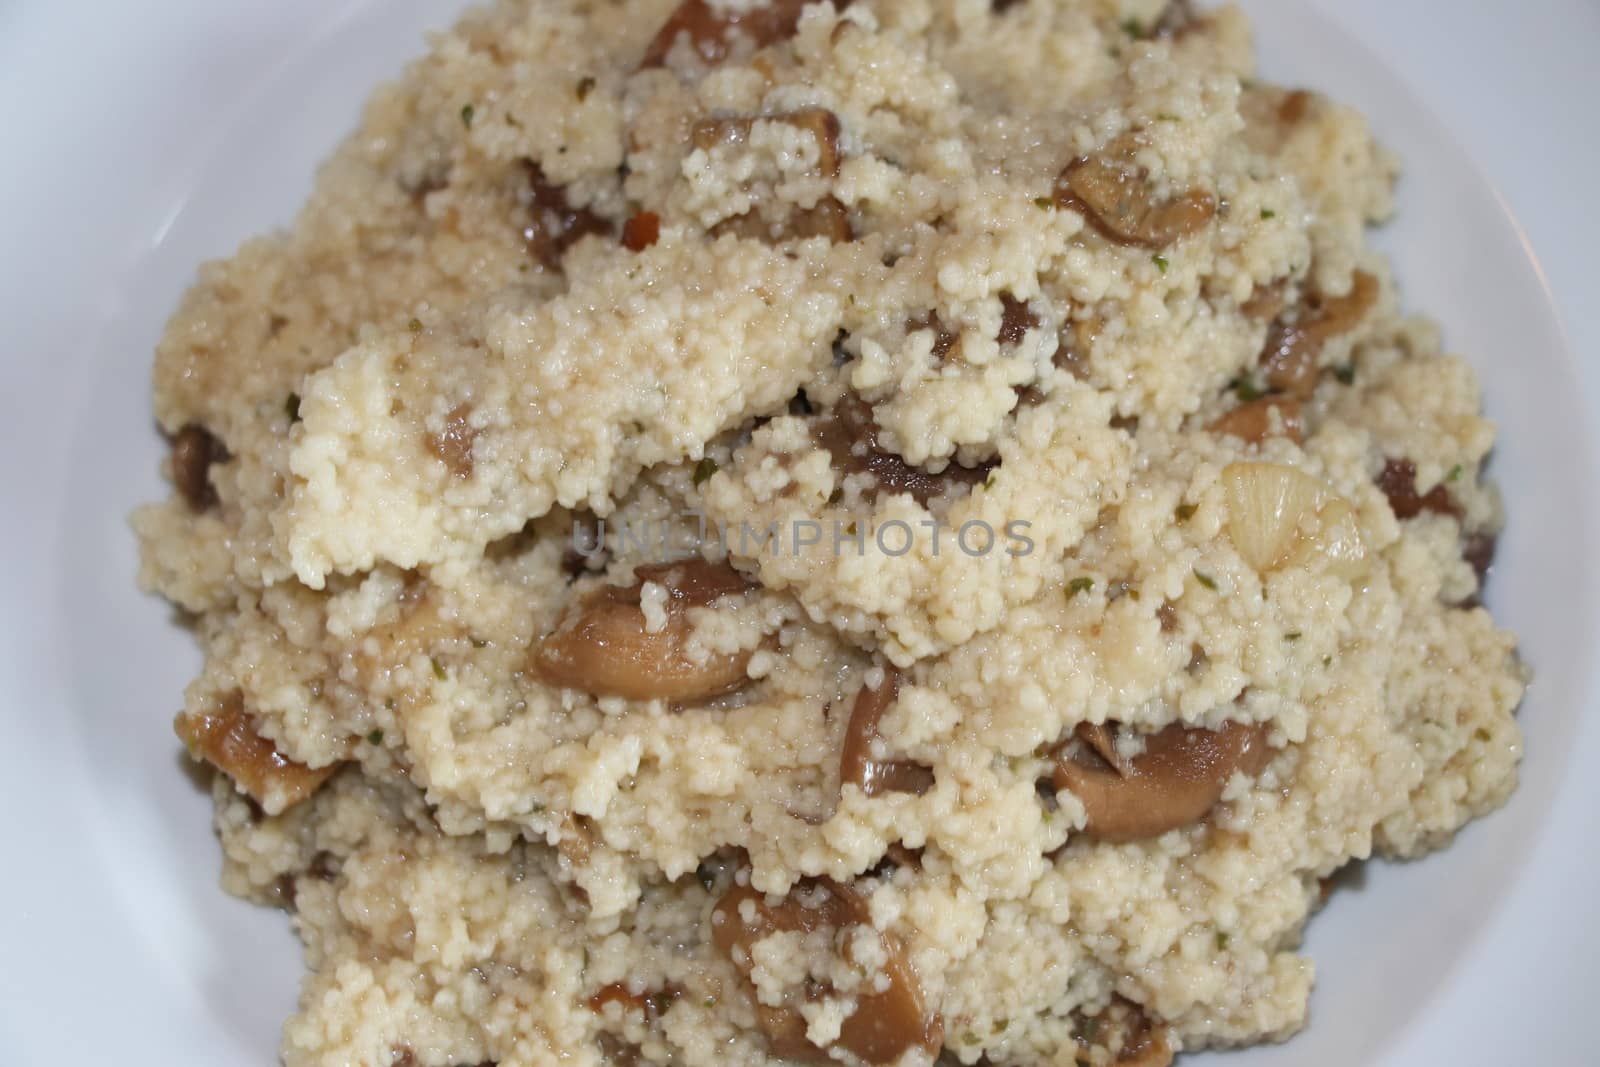 Dish with mushroom and couscous in a plate